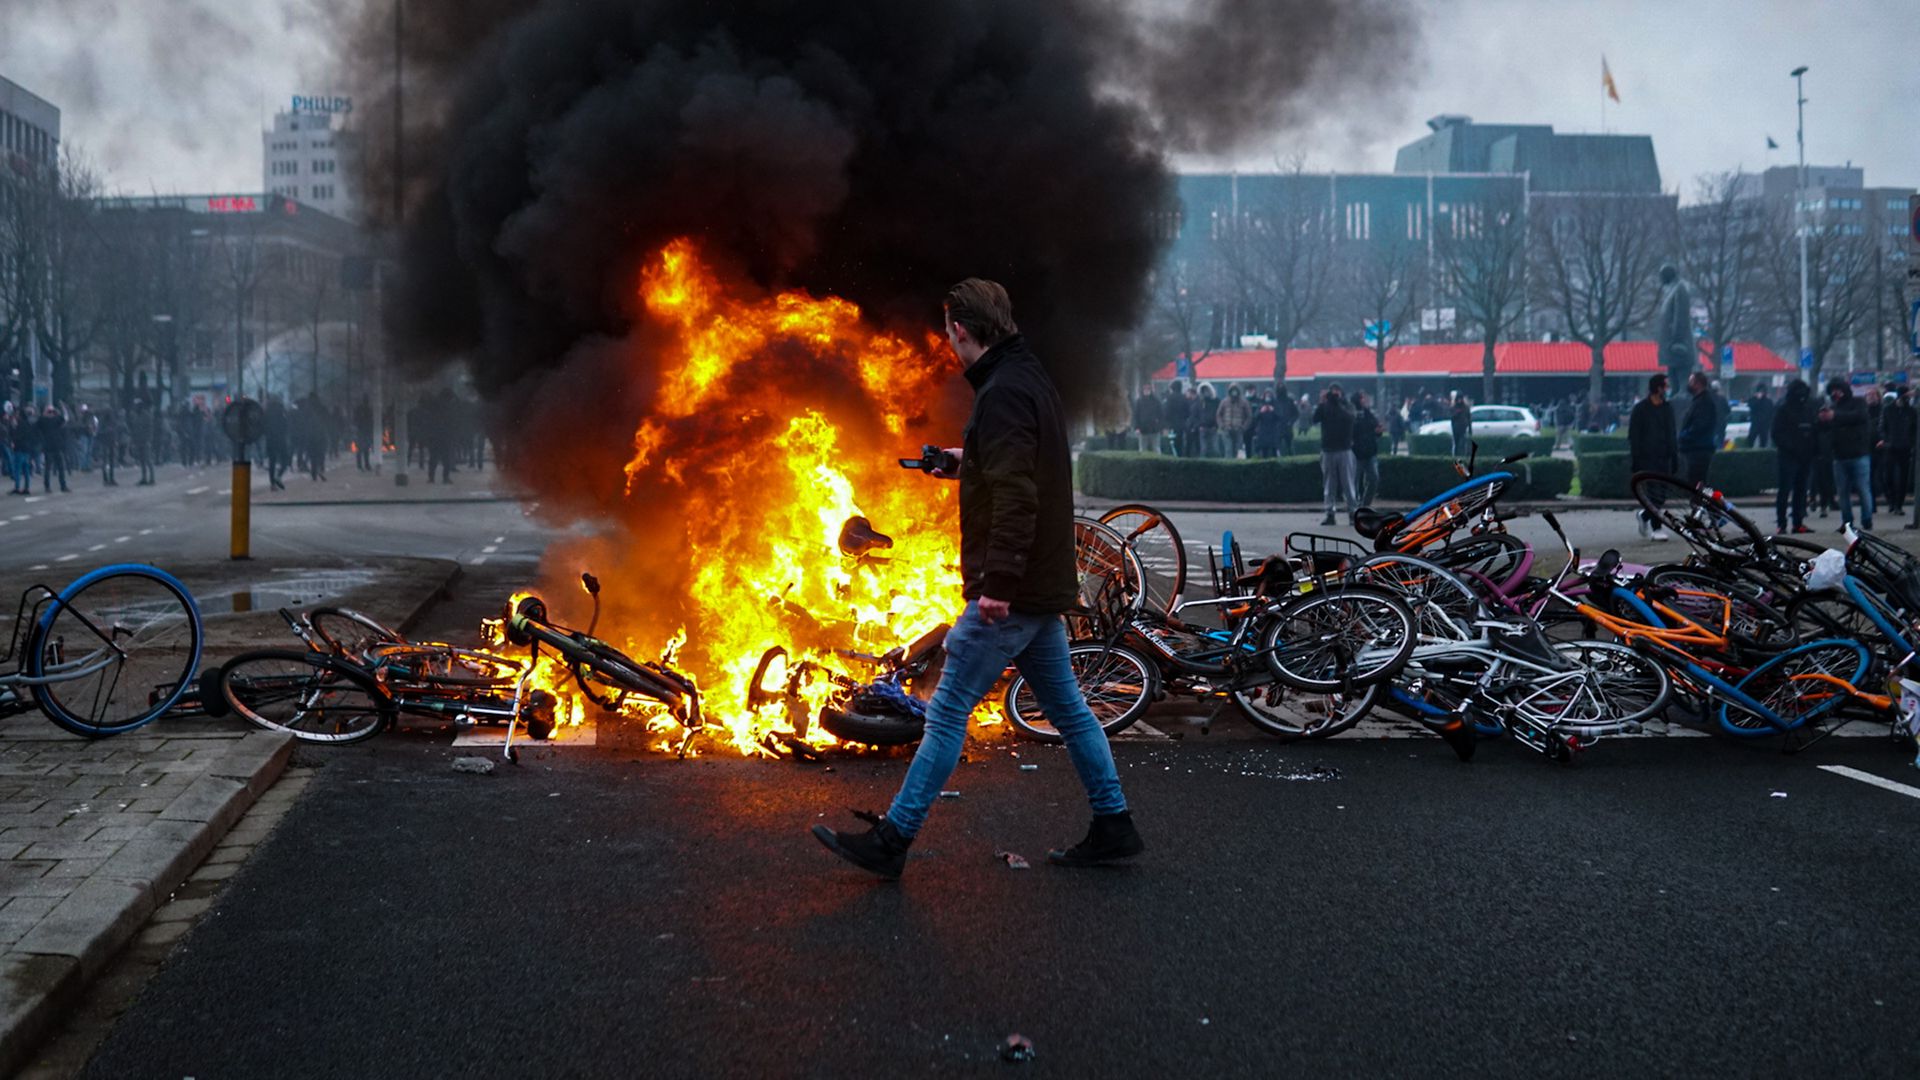 Rising anger: Protesters lay bikes down to block a street and set a fire during a protest against the coronavirus measures in Eindhoven in January - Credit: Anadolu Agency via Getty Images